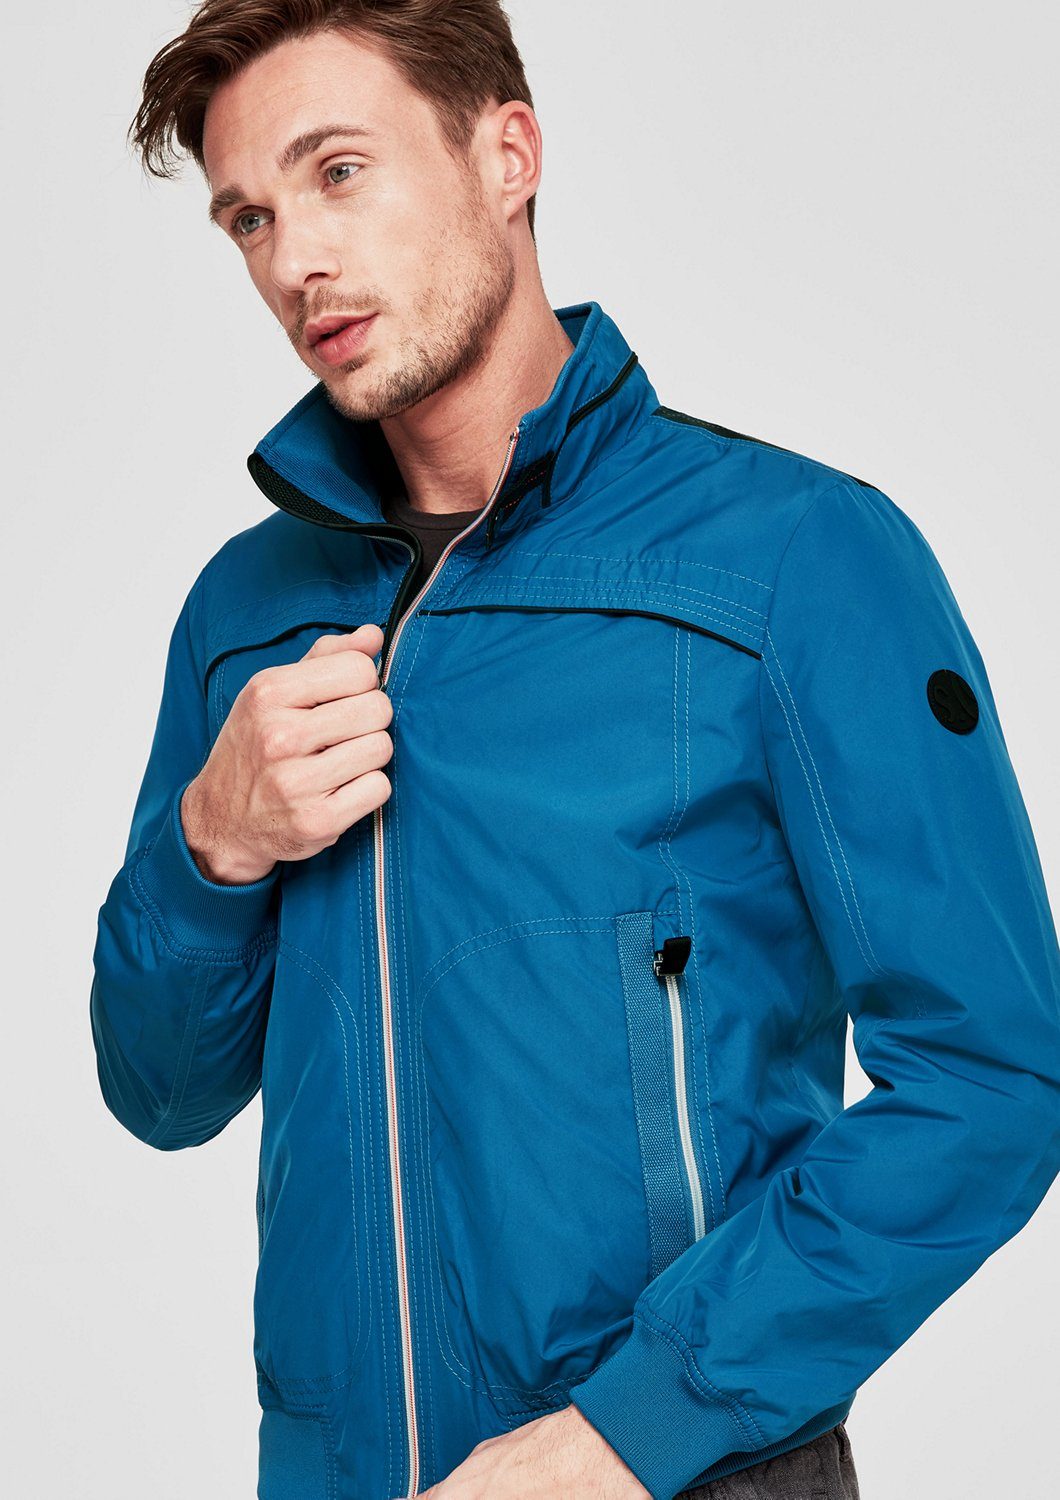 Otto - s.Oliver RED LABEL NU 15% KORTING: s.Oliver RED LABEL Sportief outerwear jack